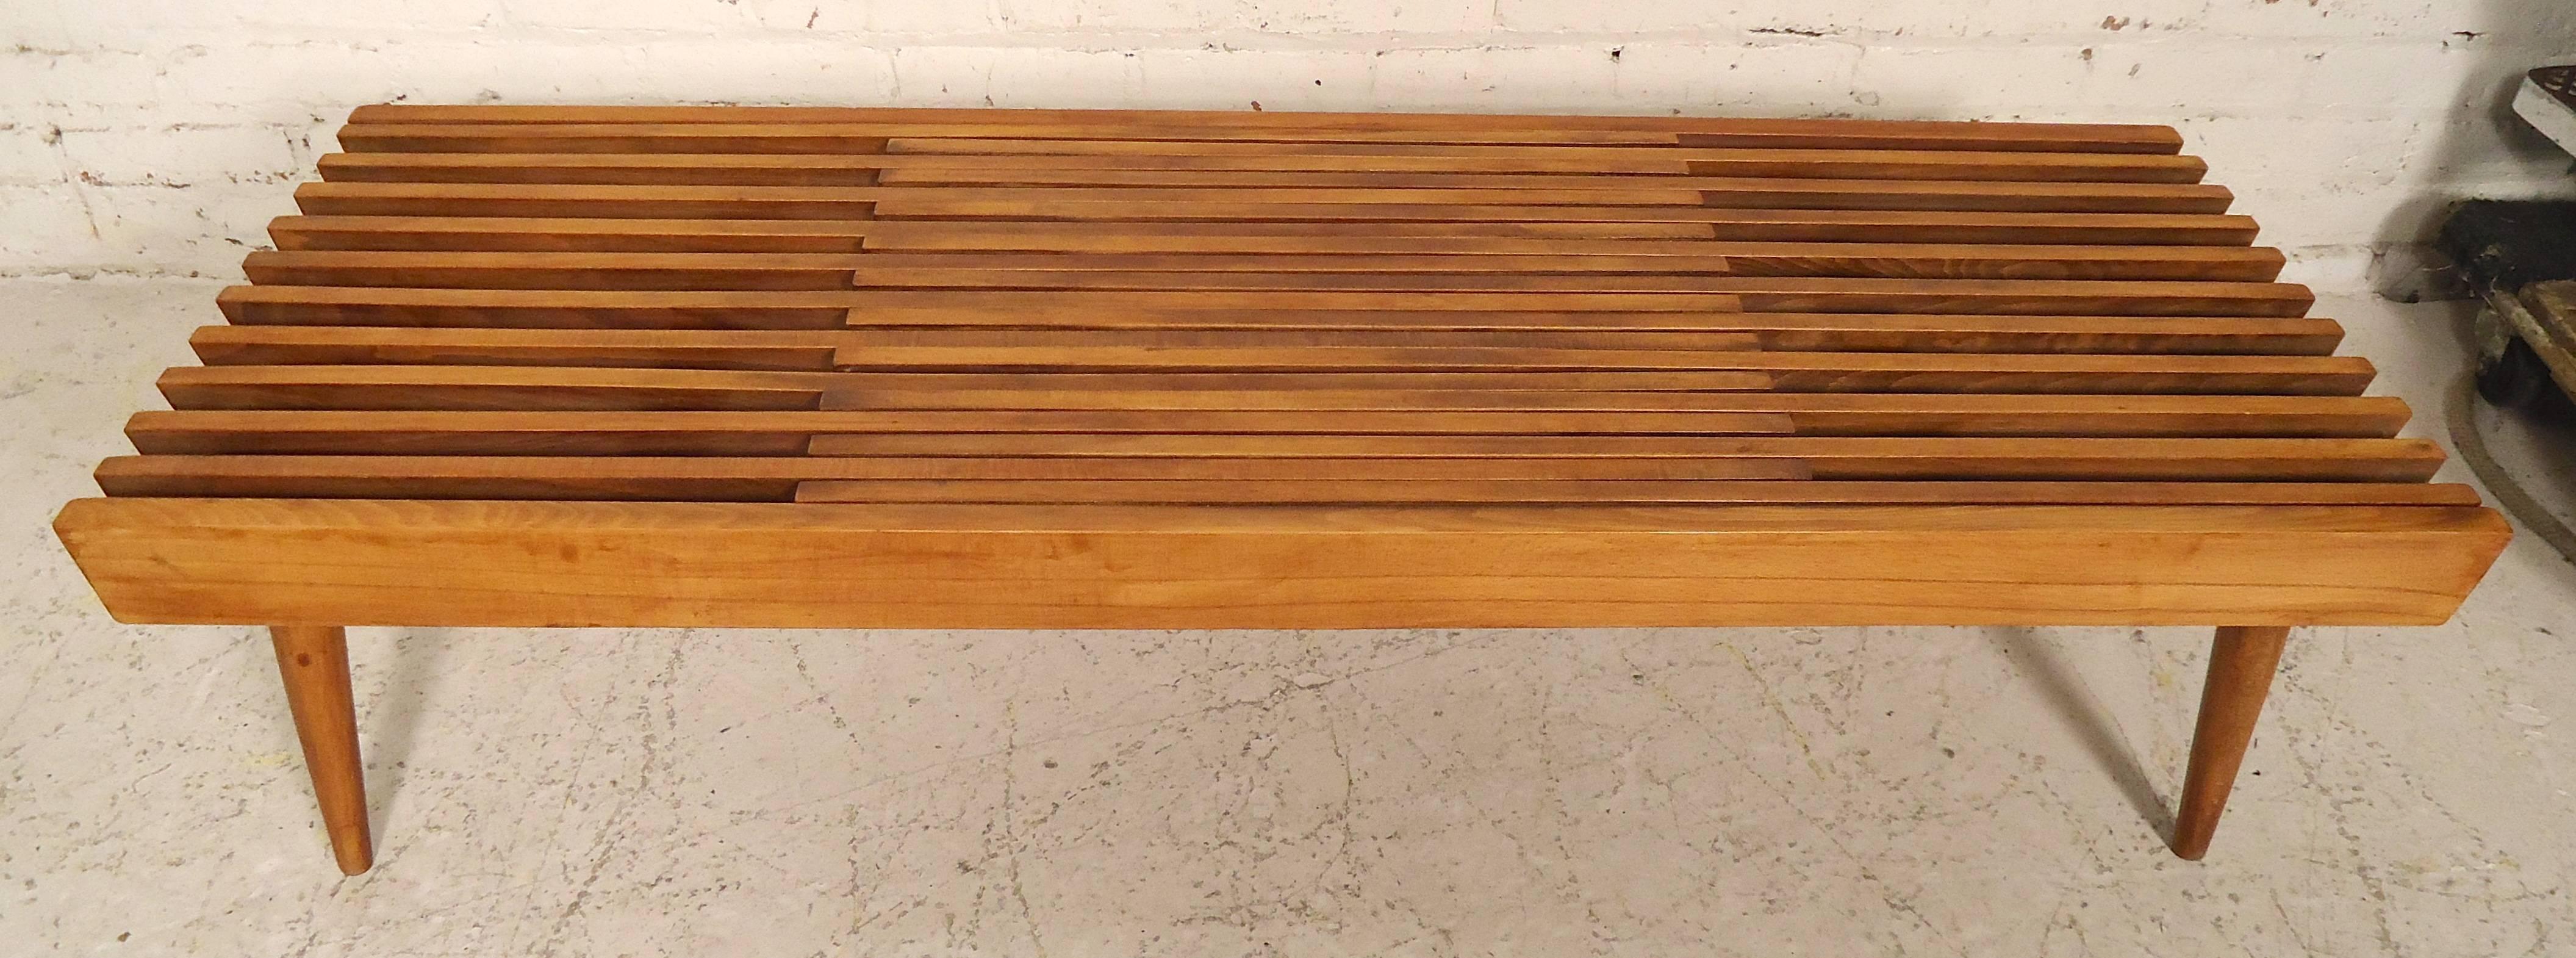 Great vintage modern slat bench in walnut. Extends to six feet long. Each side extends for various lengths. Makes a great bedside or entry way bench.

(Please confirm item location - NY or NJ - with dealer).
 